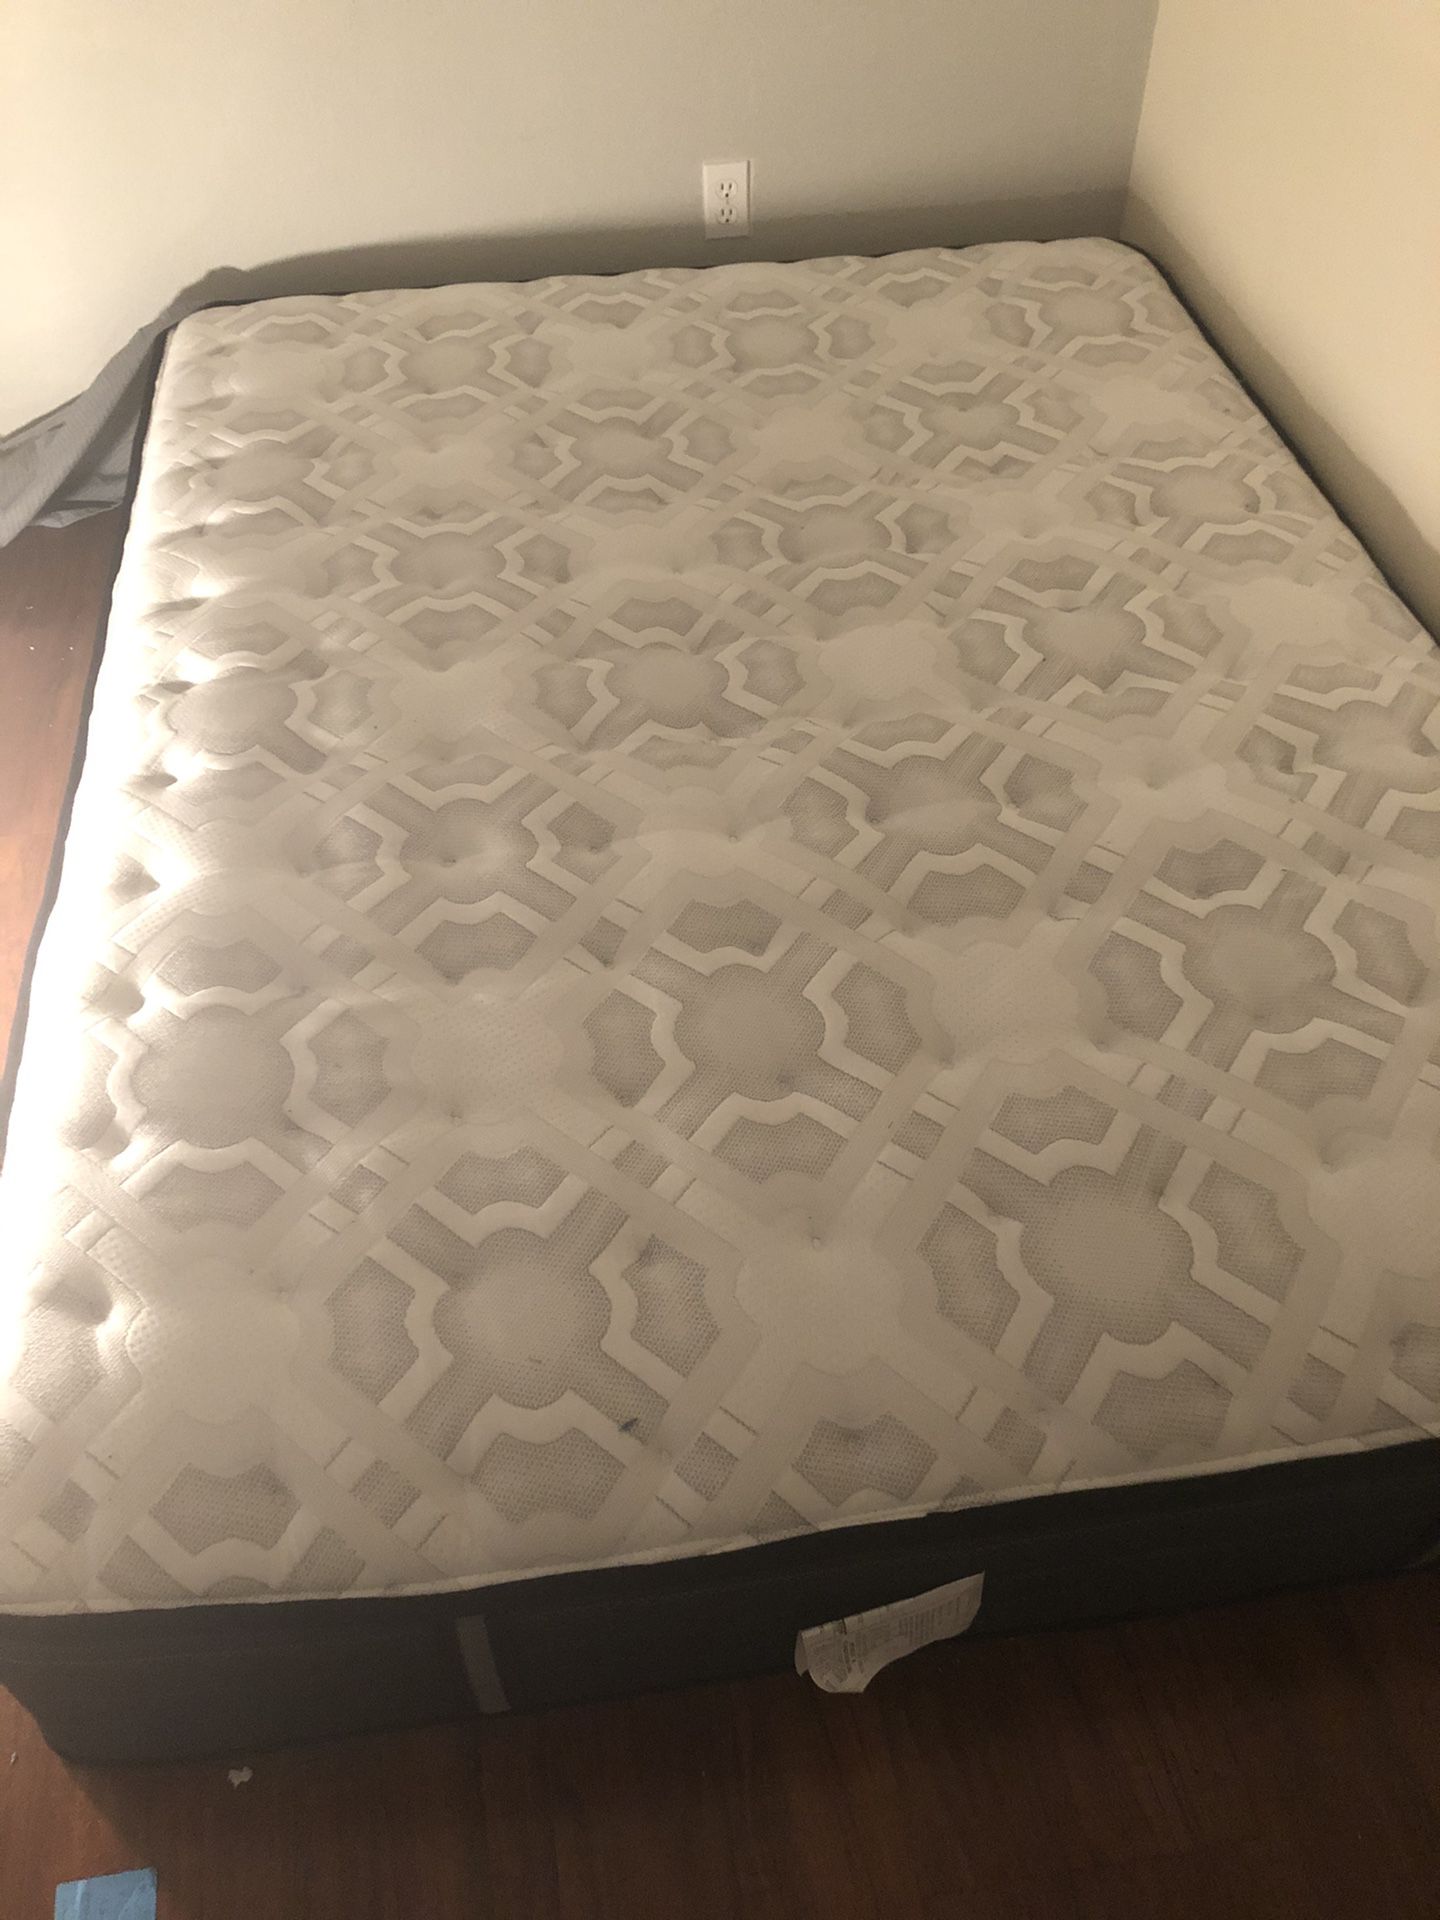 New mattress never used!